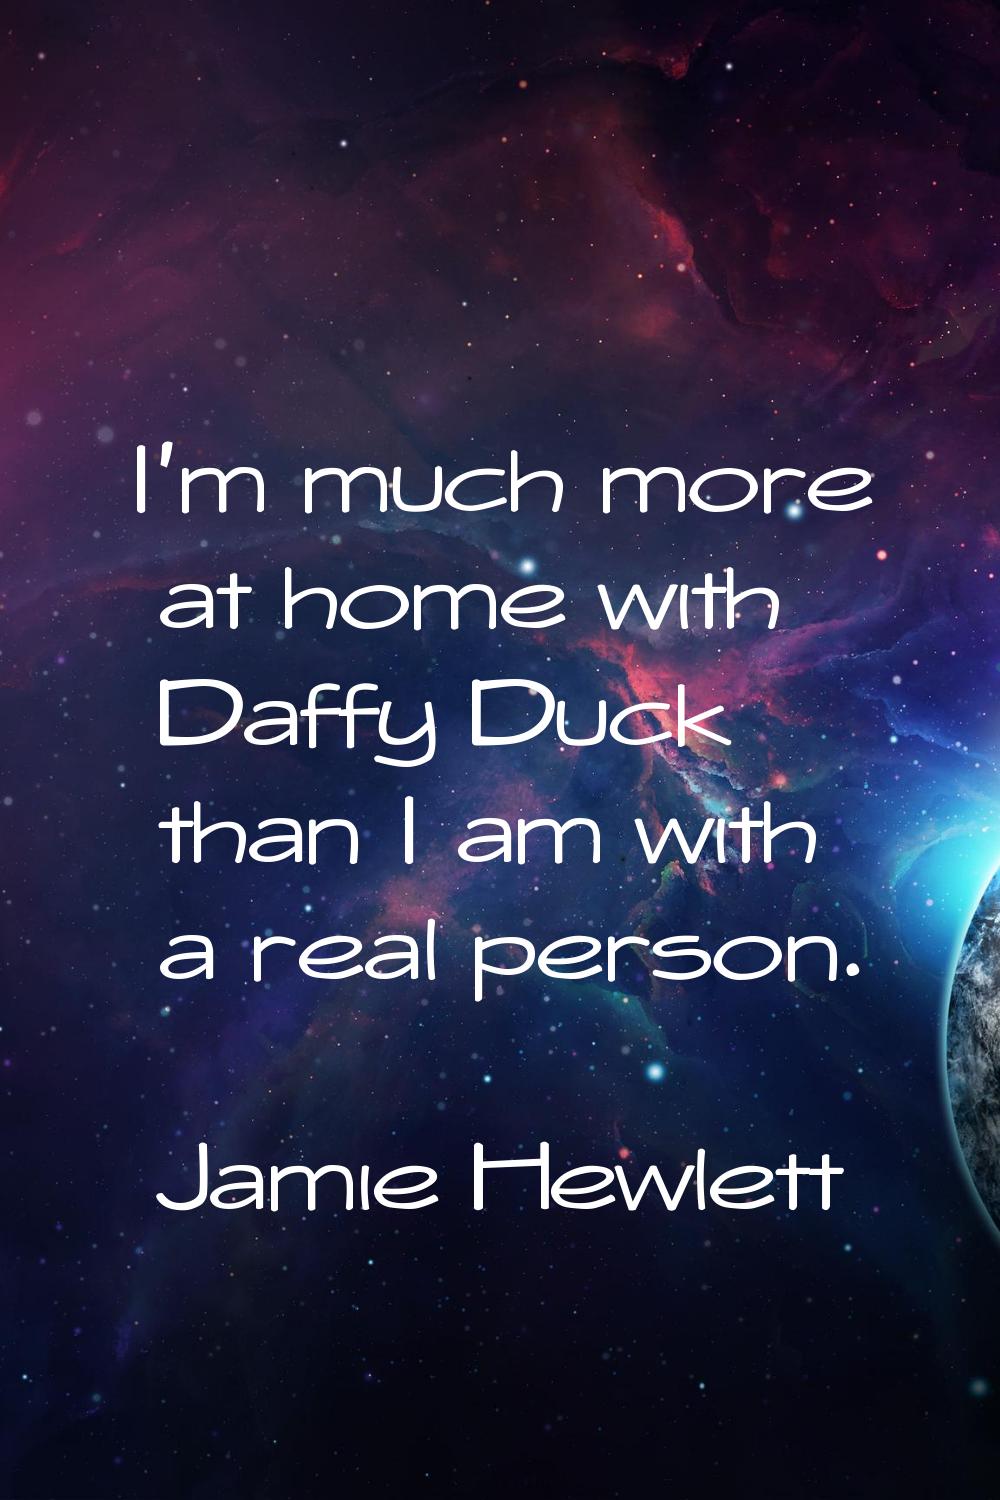 I'm much more at home with Daffy Duck than I am with a real person.